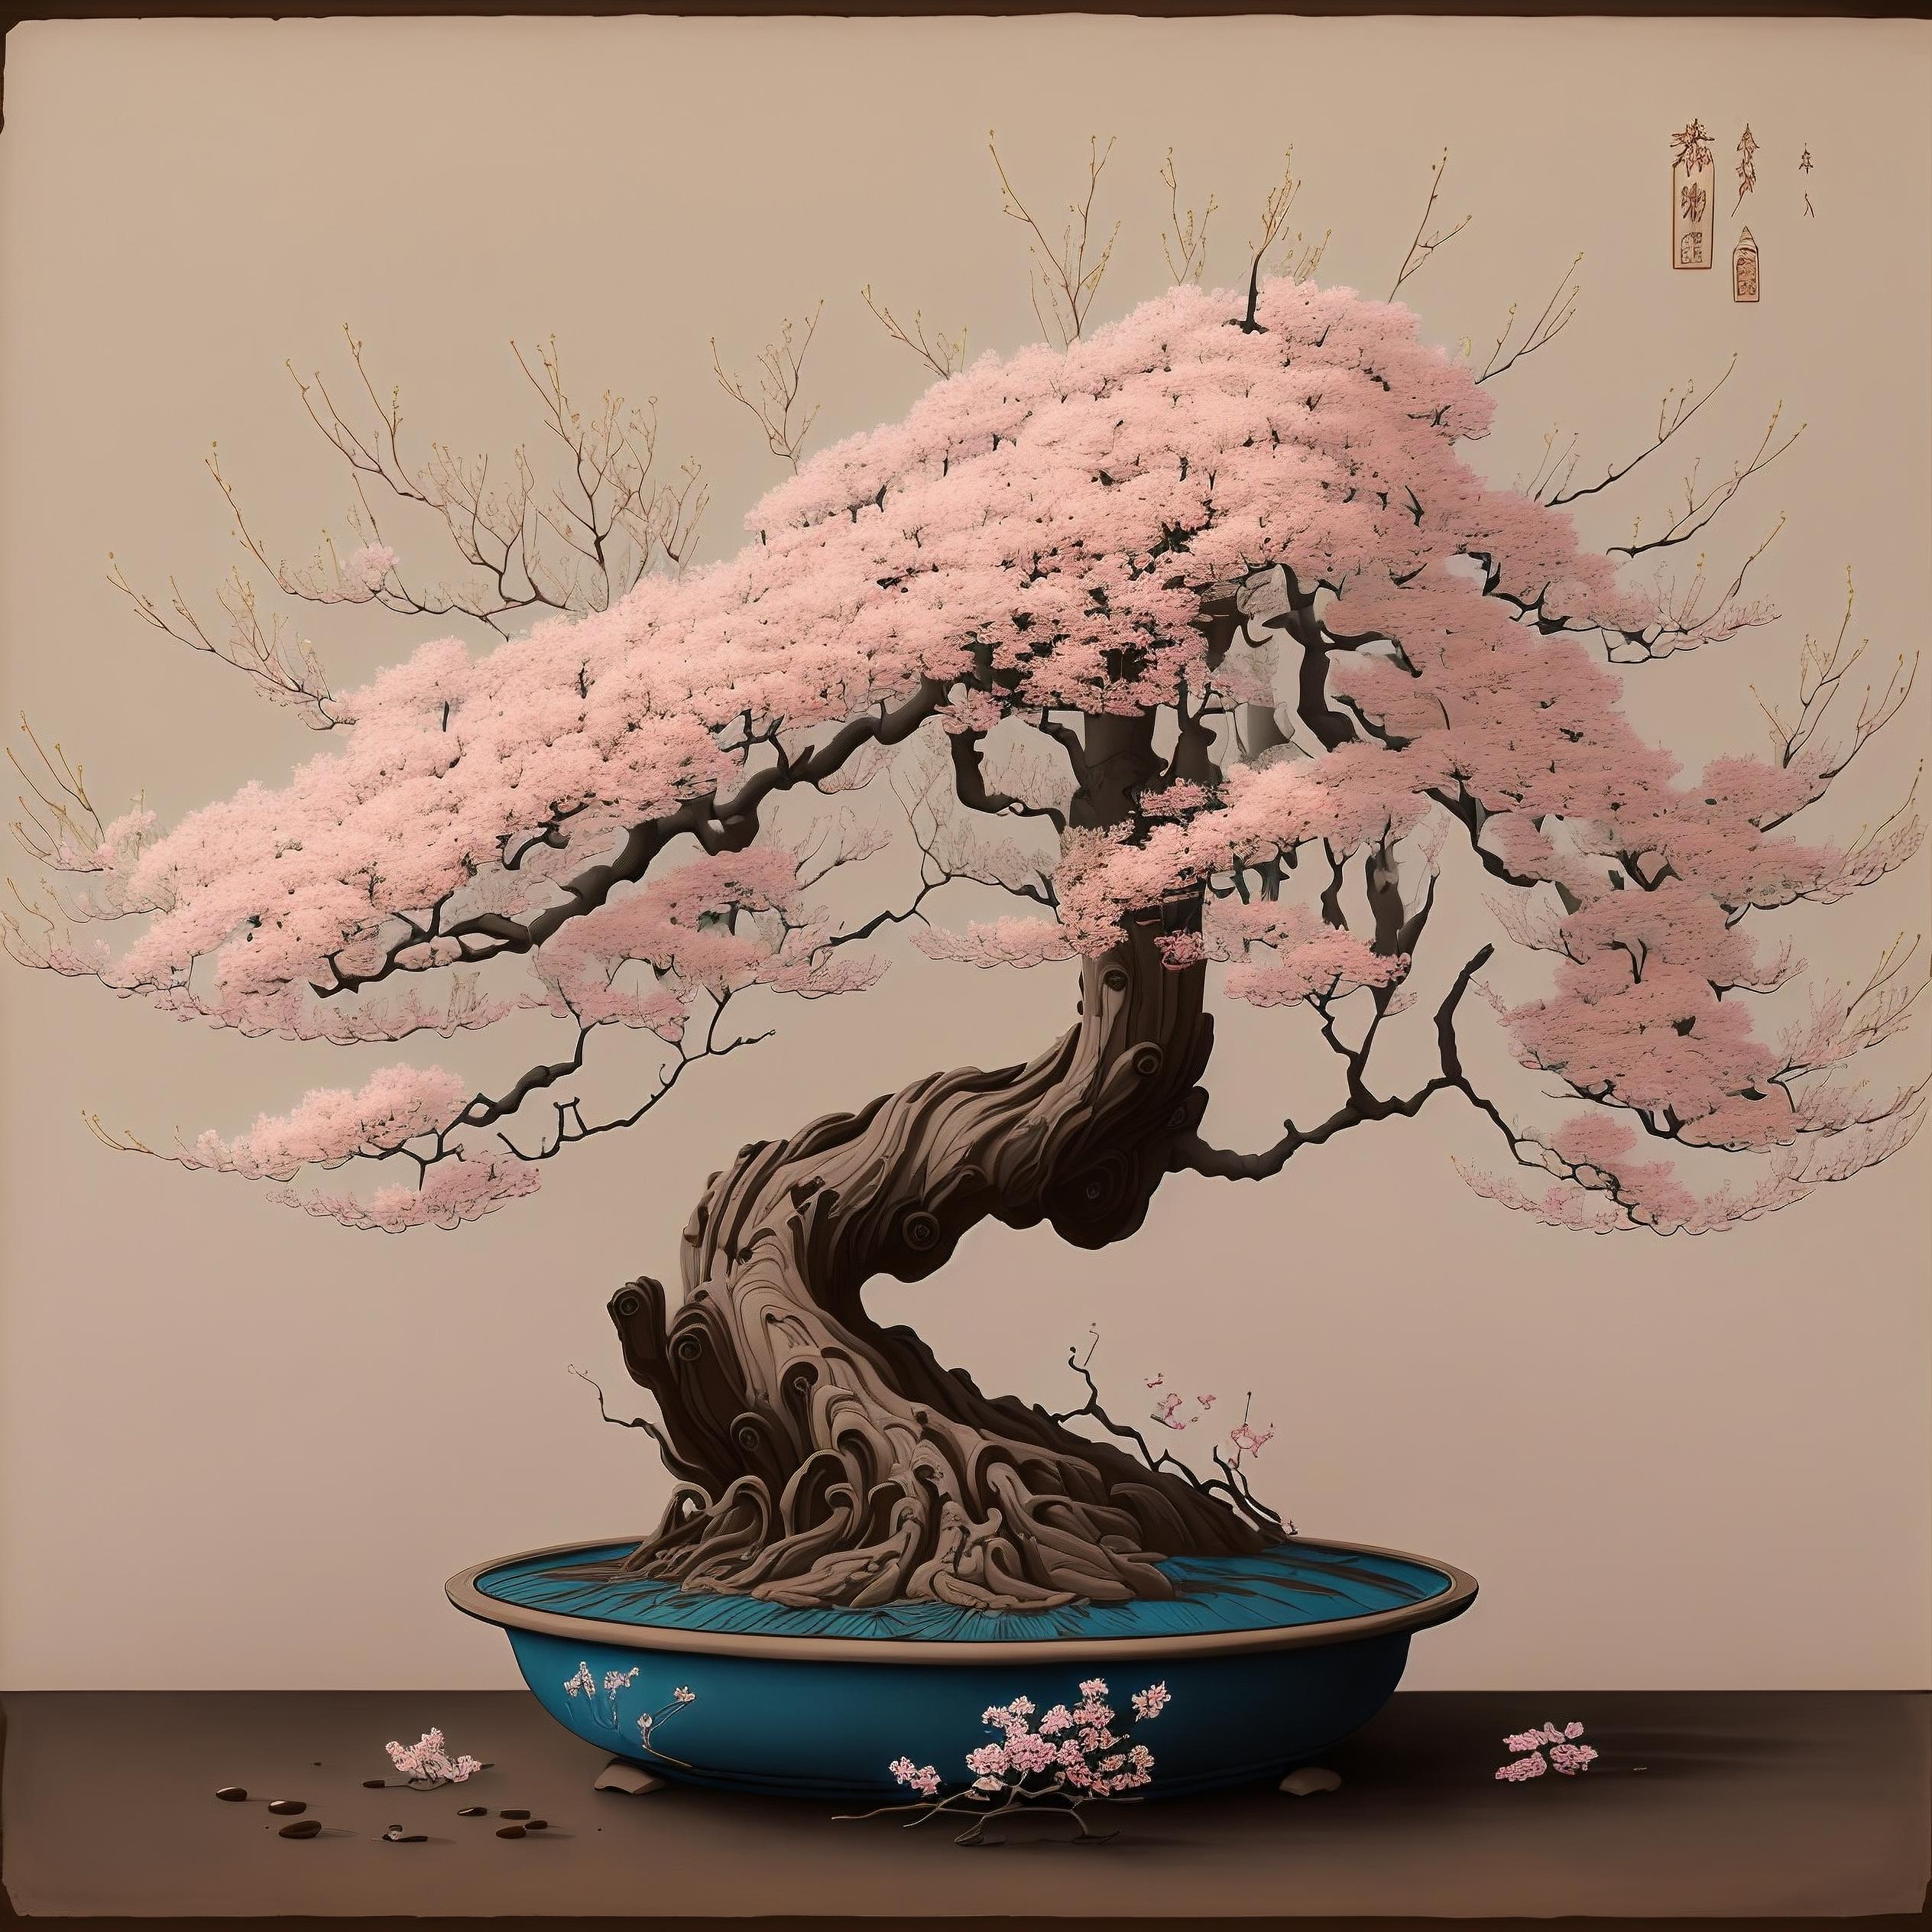 CGpaintingtree asw image by songwei2698